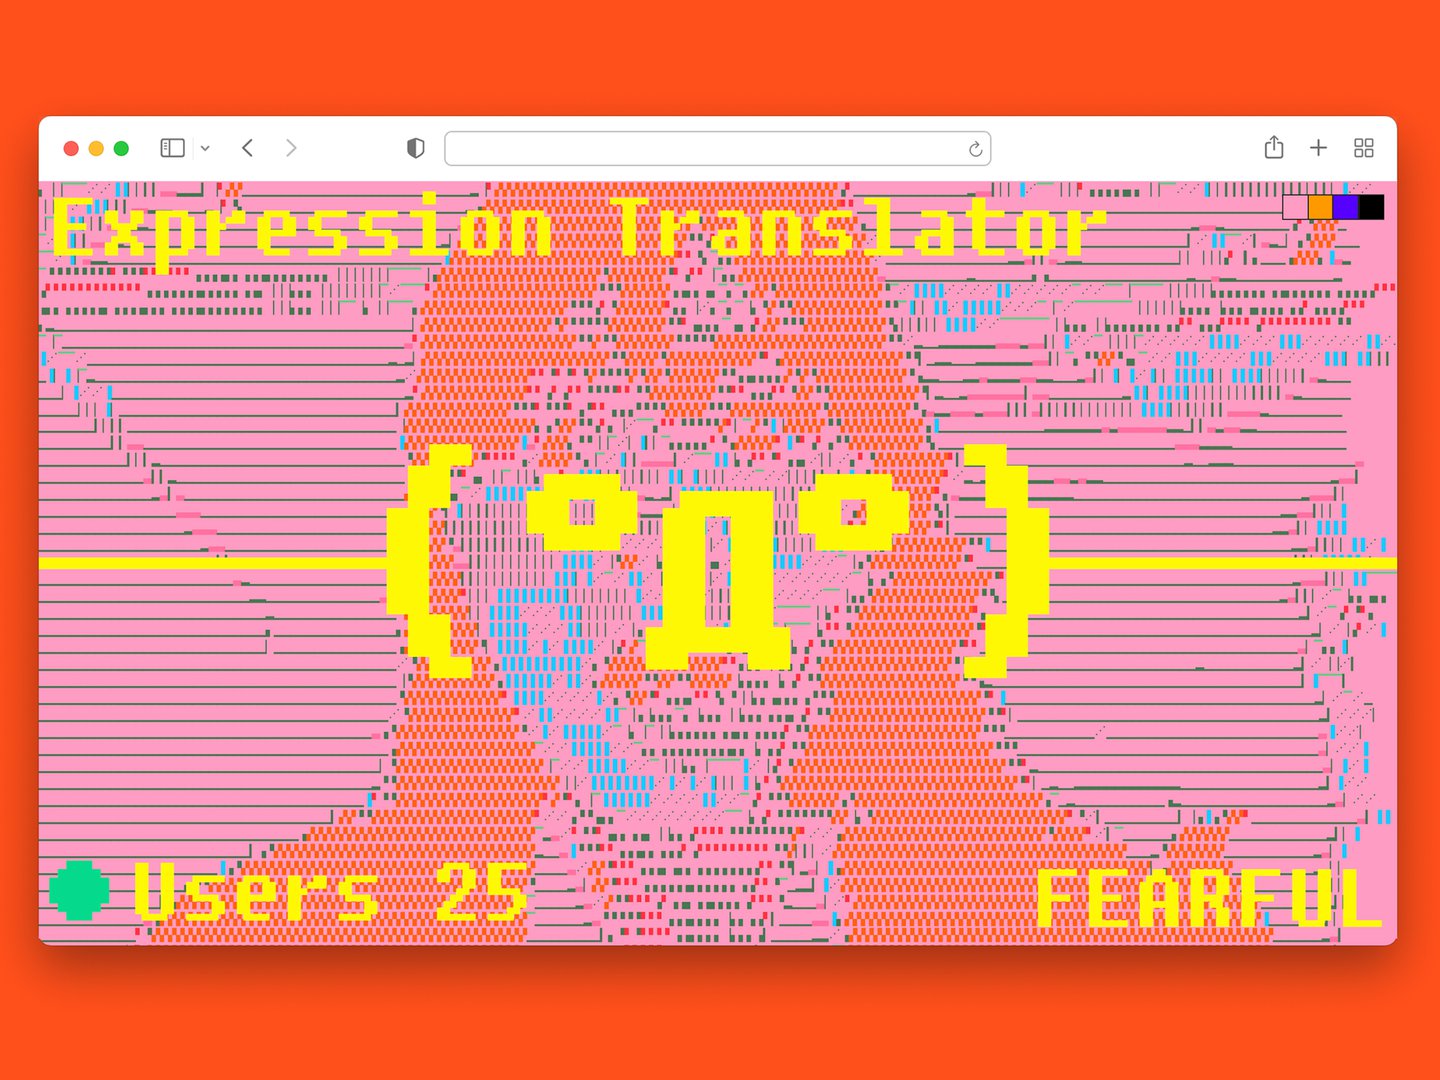 Dive into the random, genius, alphabetically-organised earth of HejHelloHalloAnnyeong’s website design and style experiments